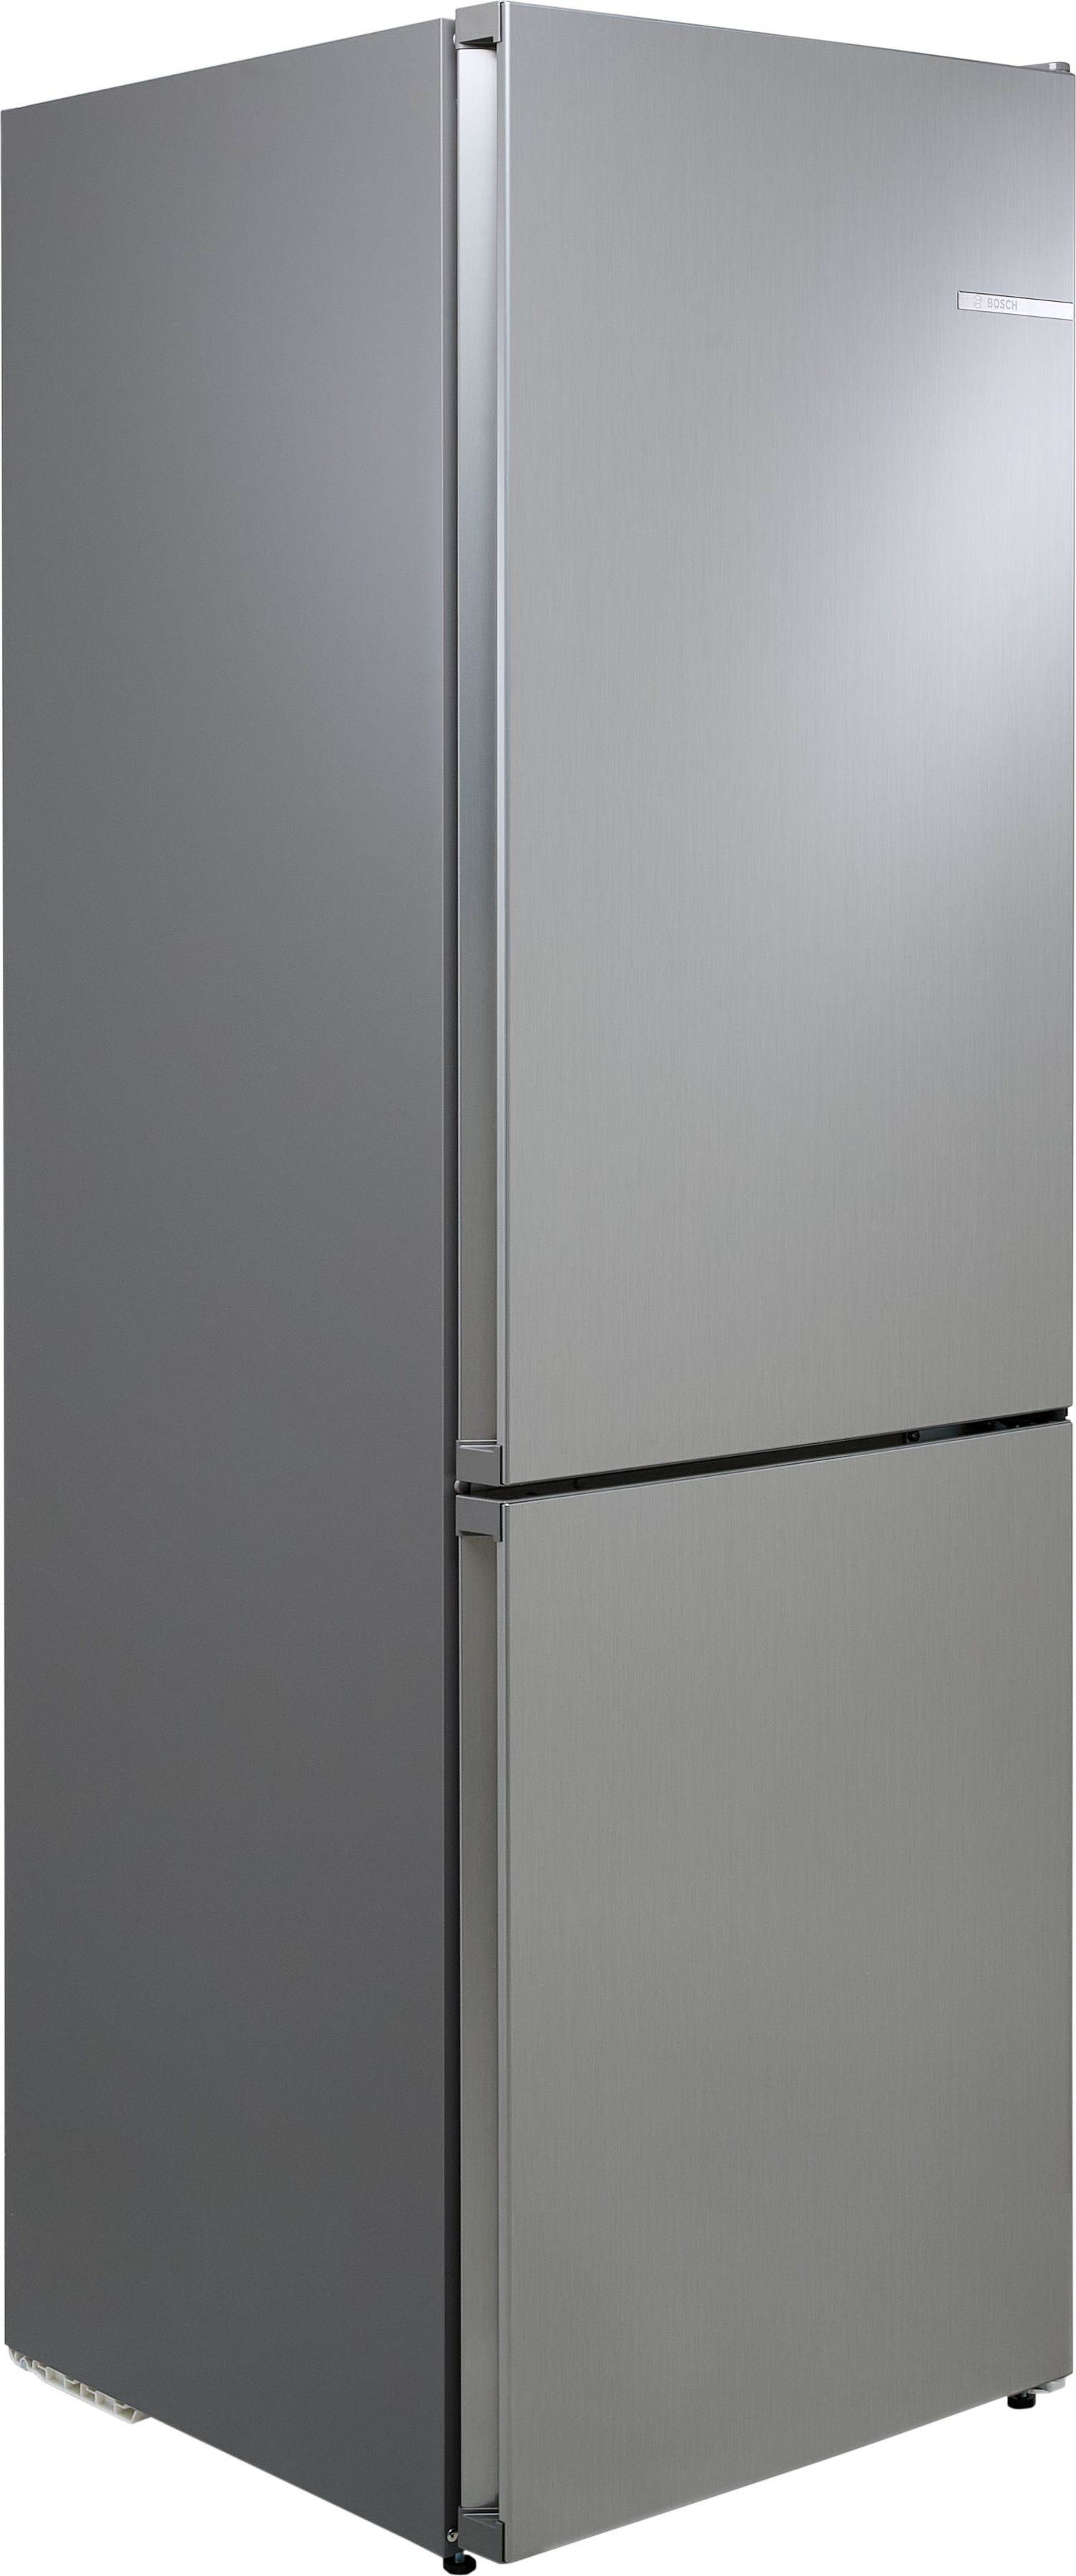 Bosch Series 4 KGN362LDFG 60/40 Frost Free Fridge Freezer - Stainless Steel Effect - D Rated, Stainless Steel